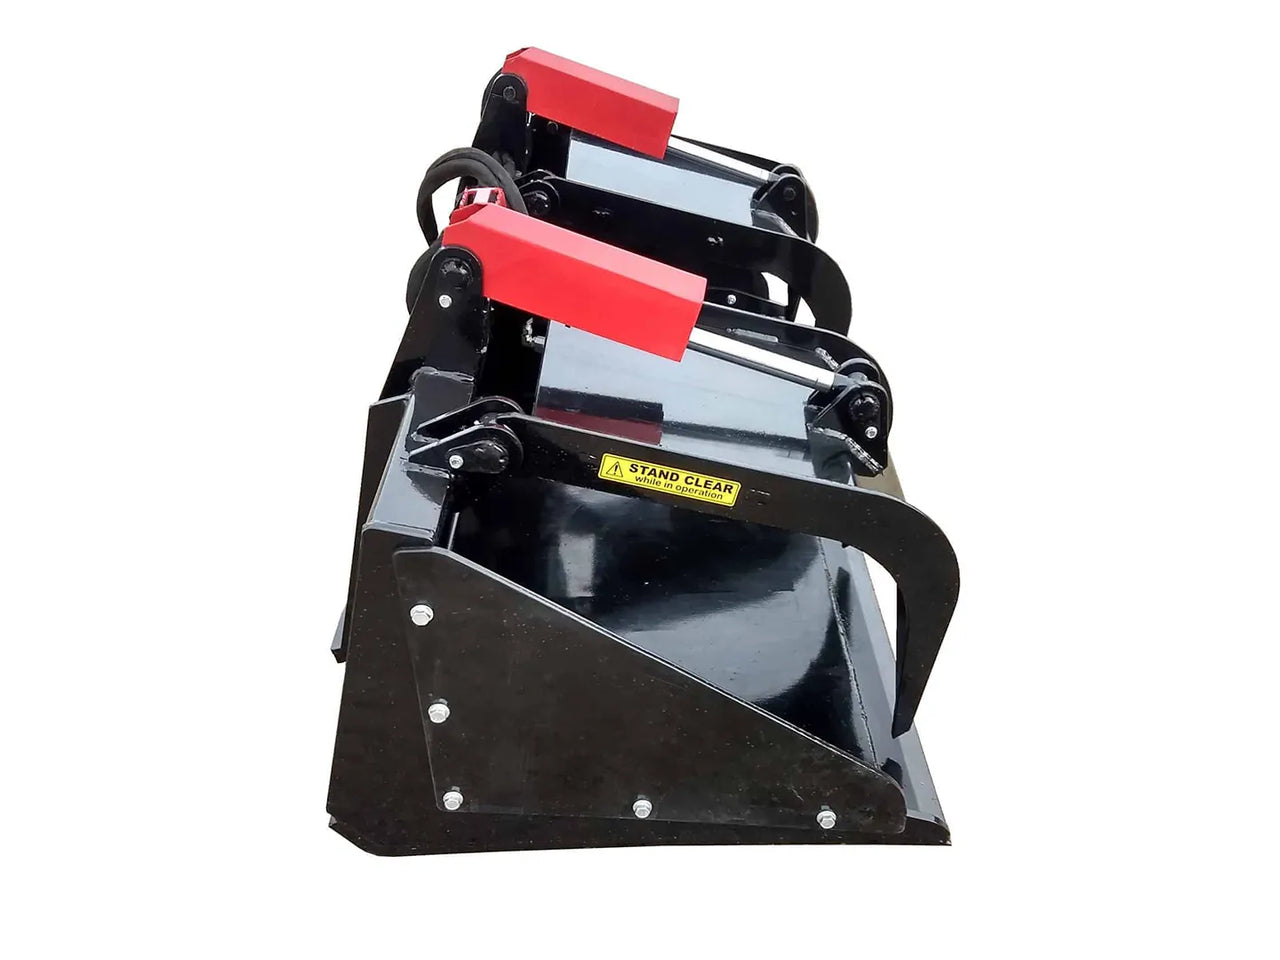 The grapple is made of heavy-duty steel and has four teeth that can be opened and closed hydraulically. 